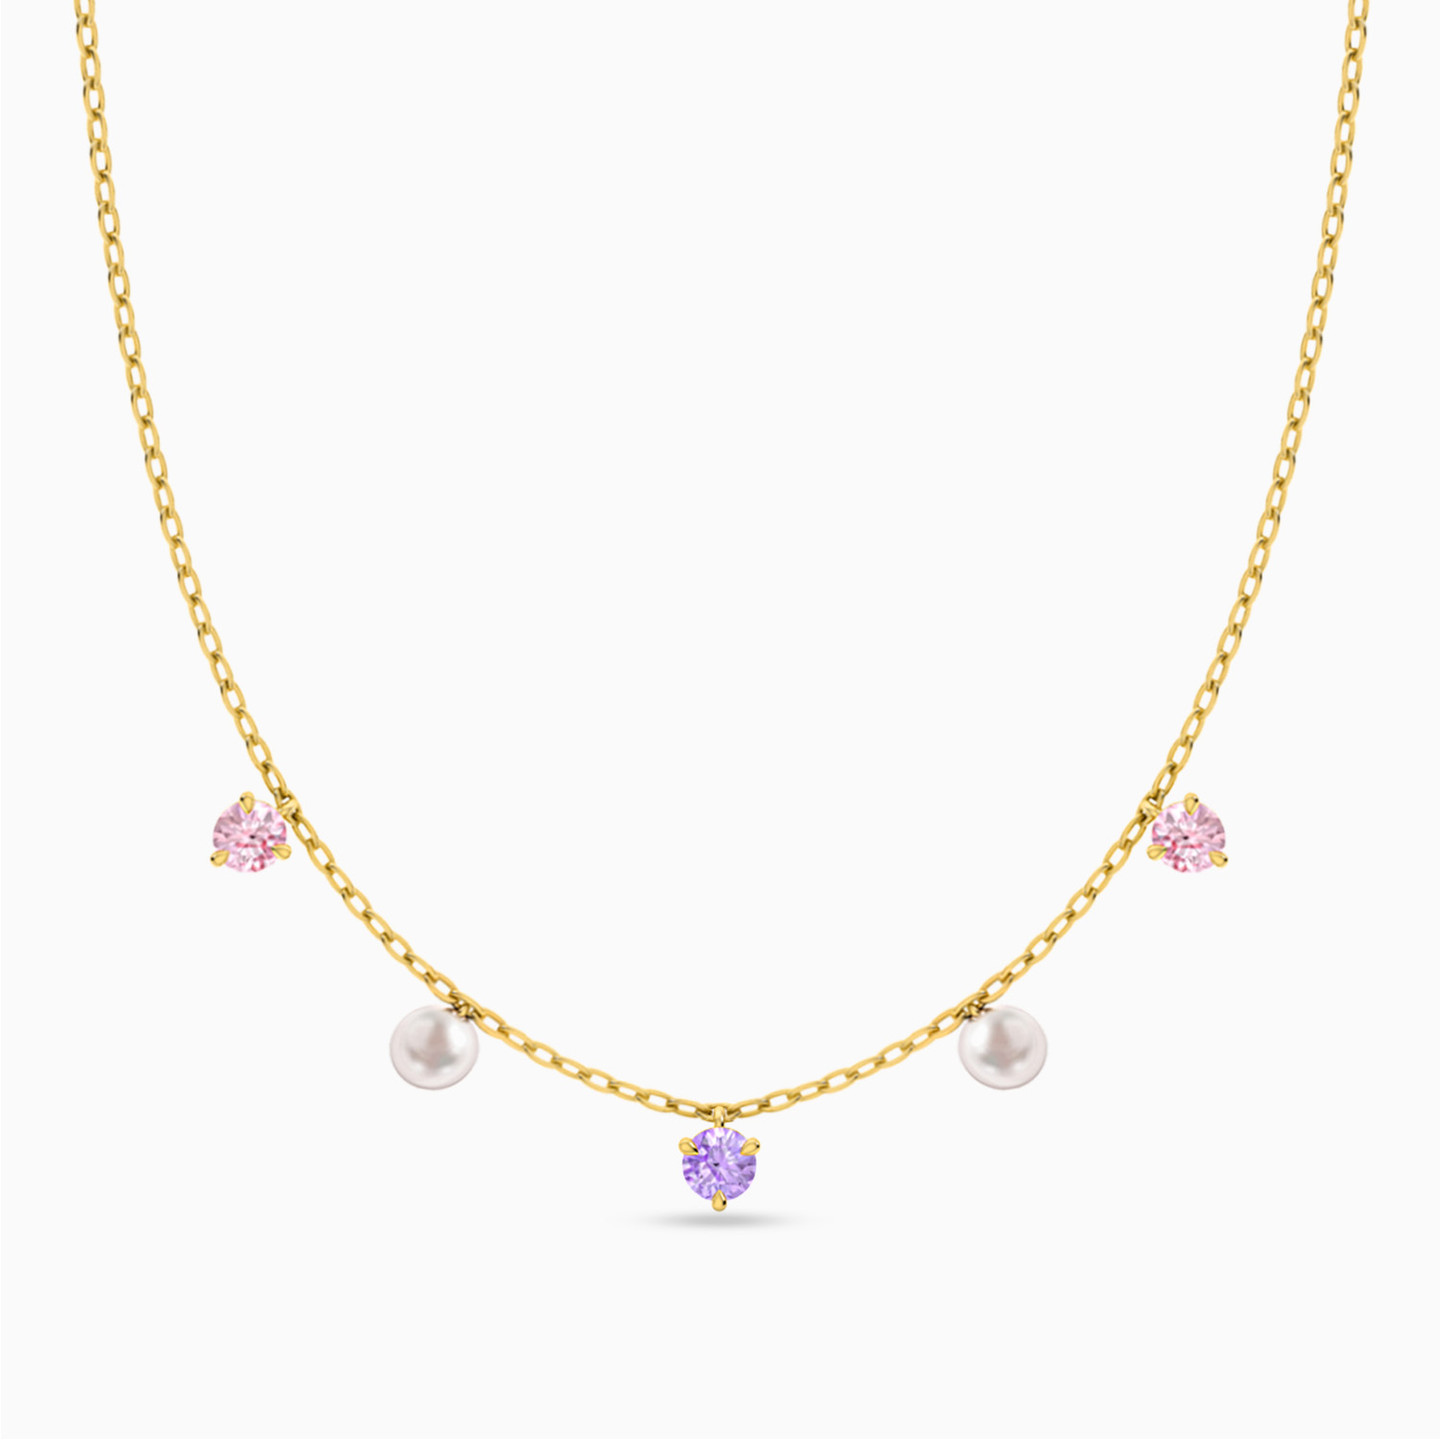 18K Gold Colored Stones Choker Necklace